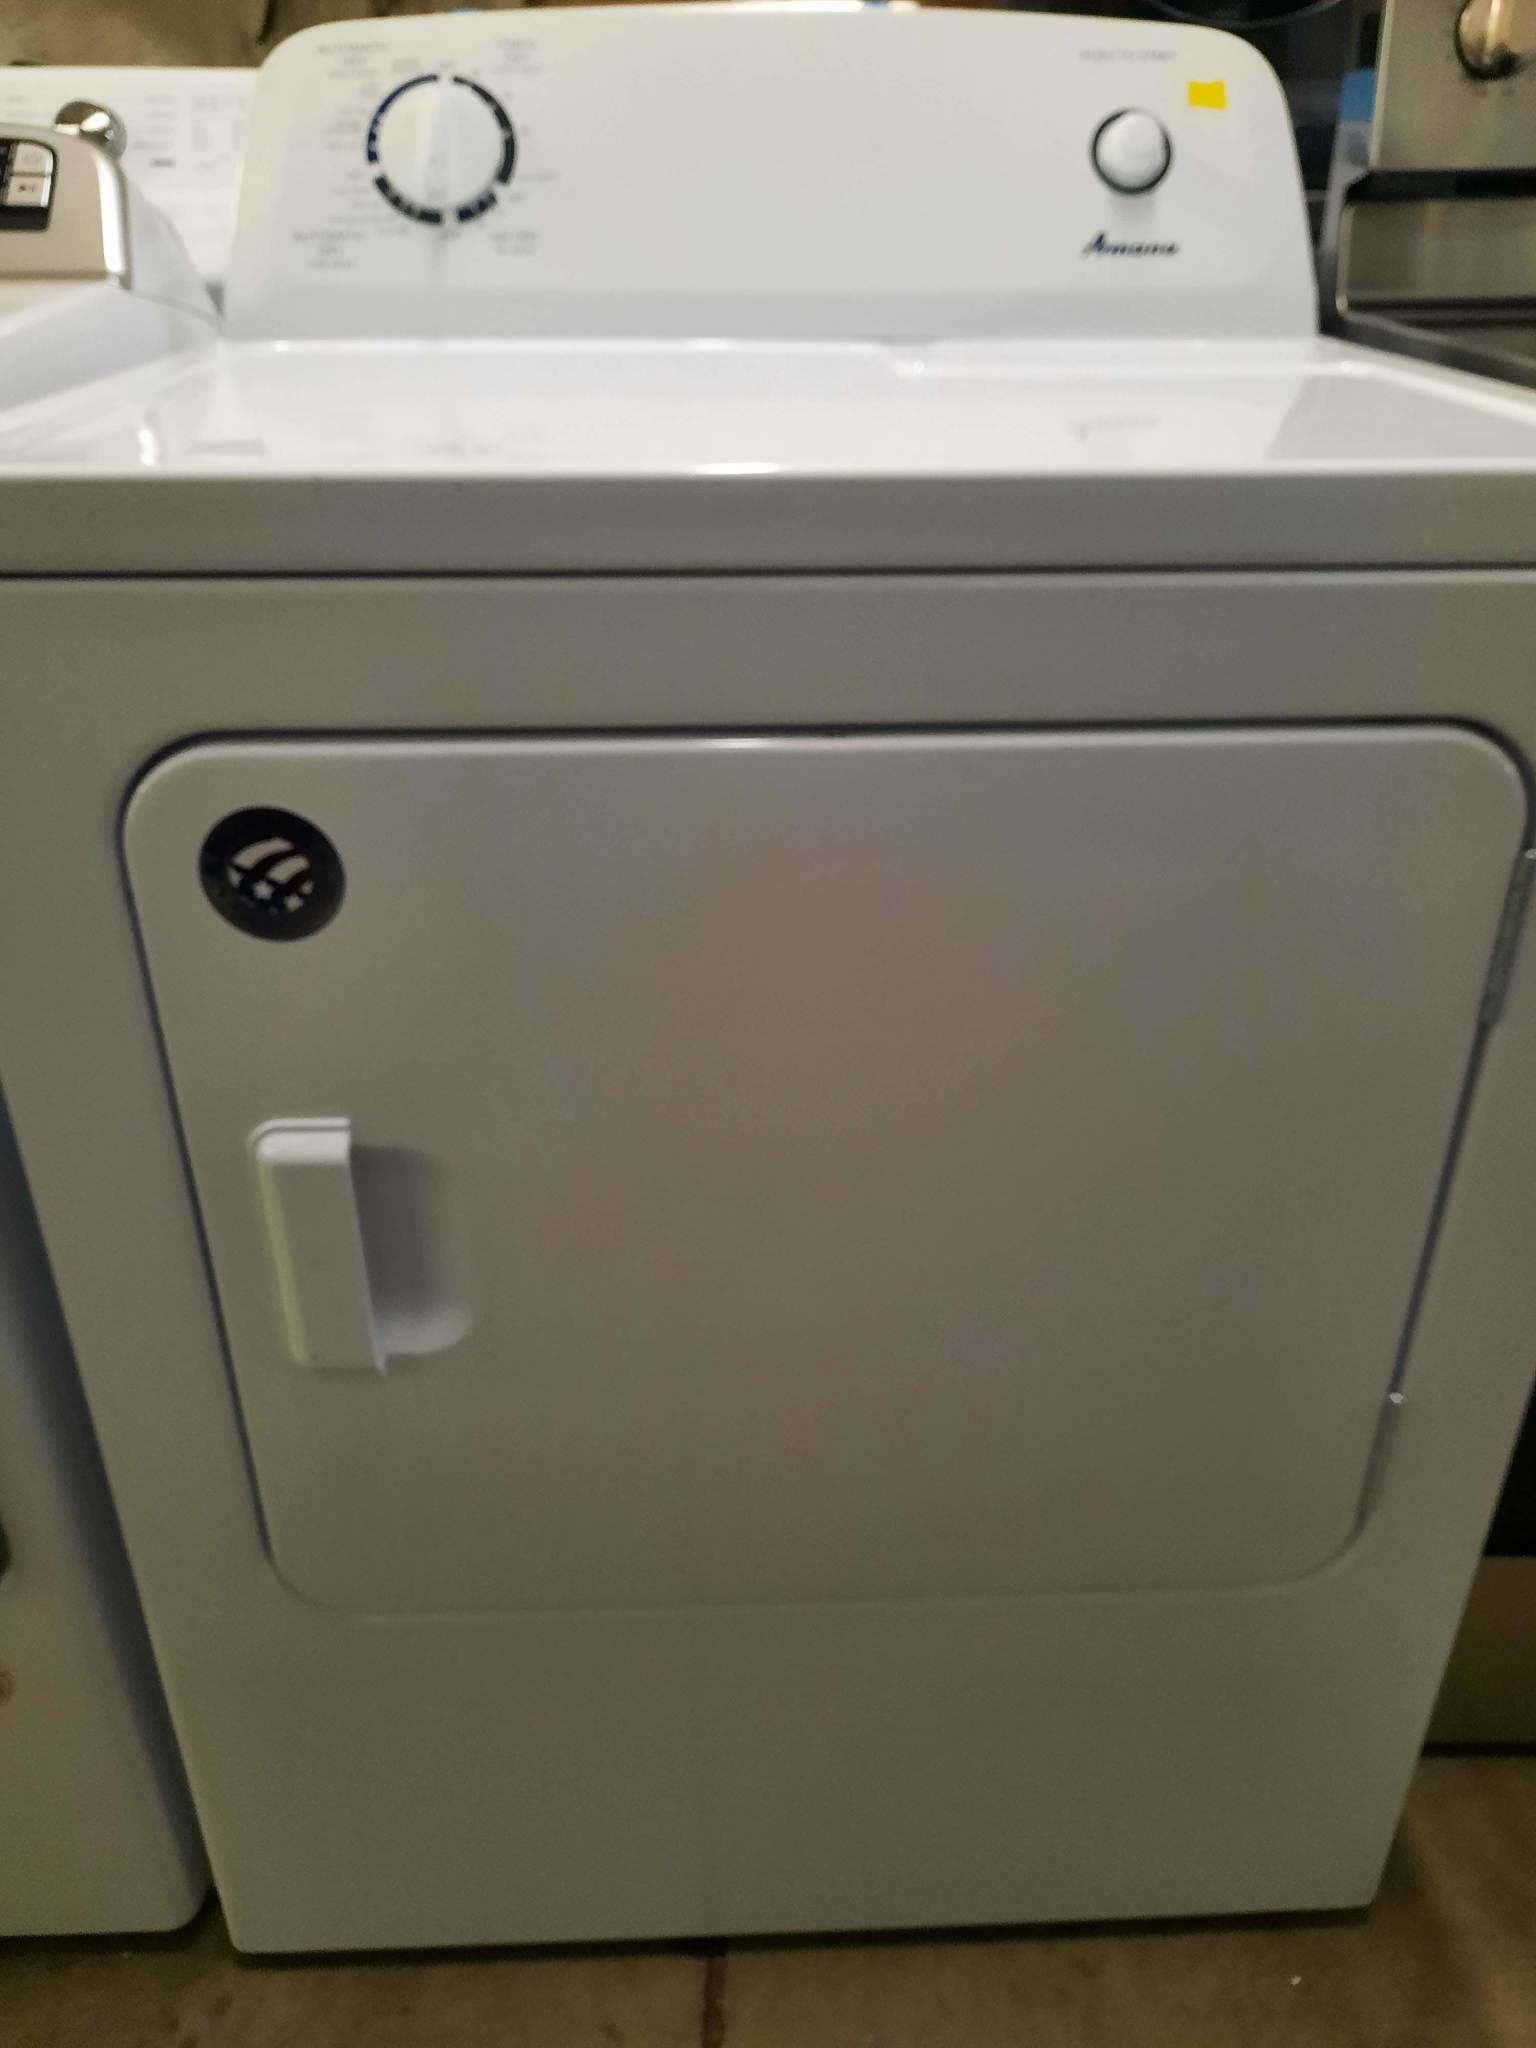 Amana *Amana NED4655EW 6.5 Cu. Ft. Electric Dryer with Automatic Dryness Control - White